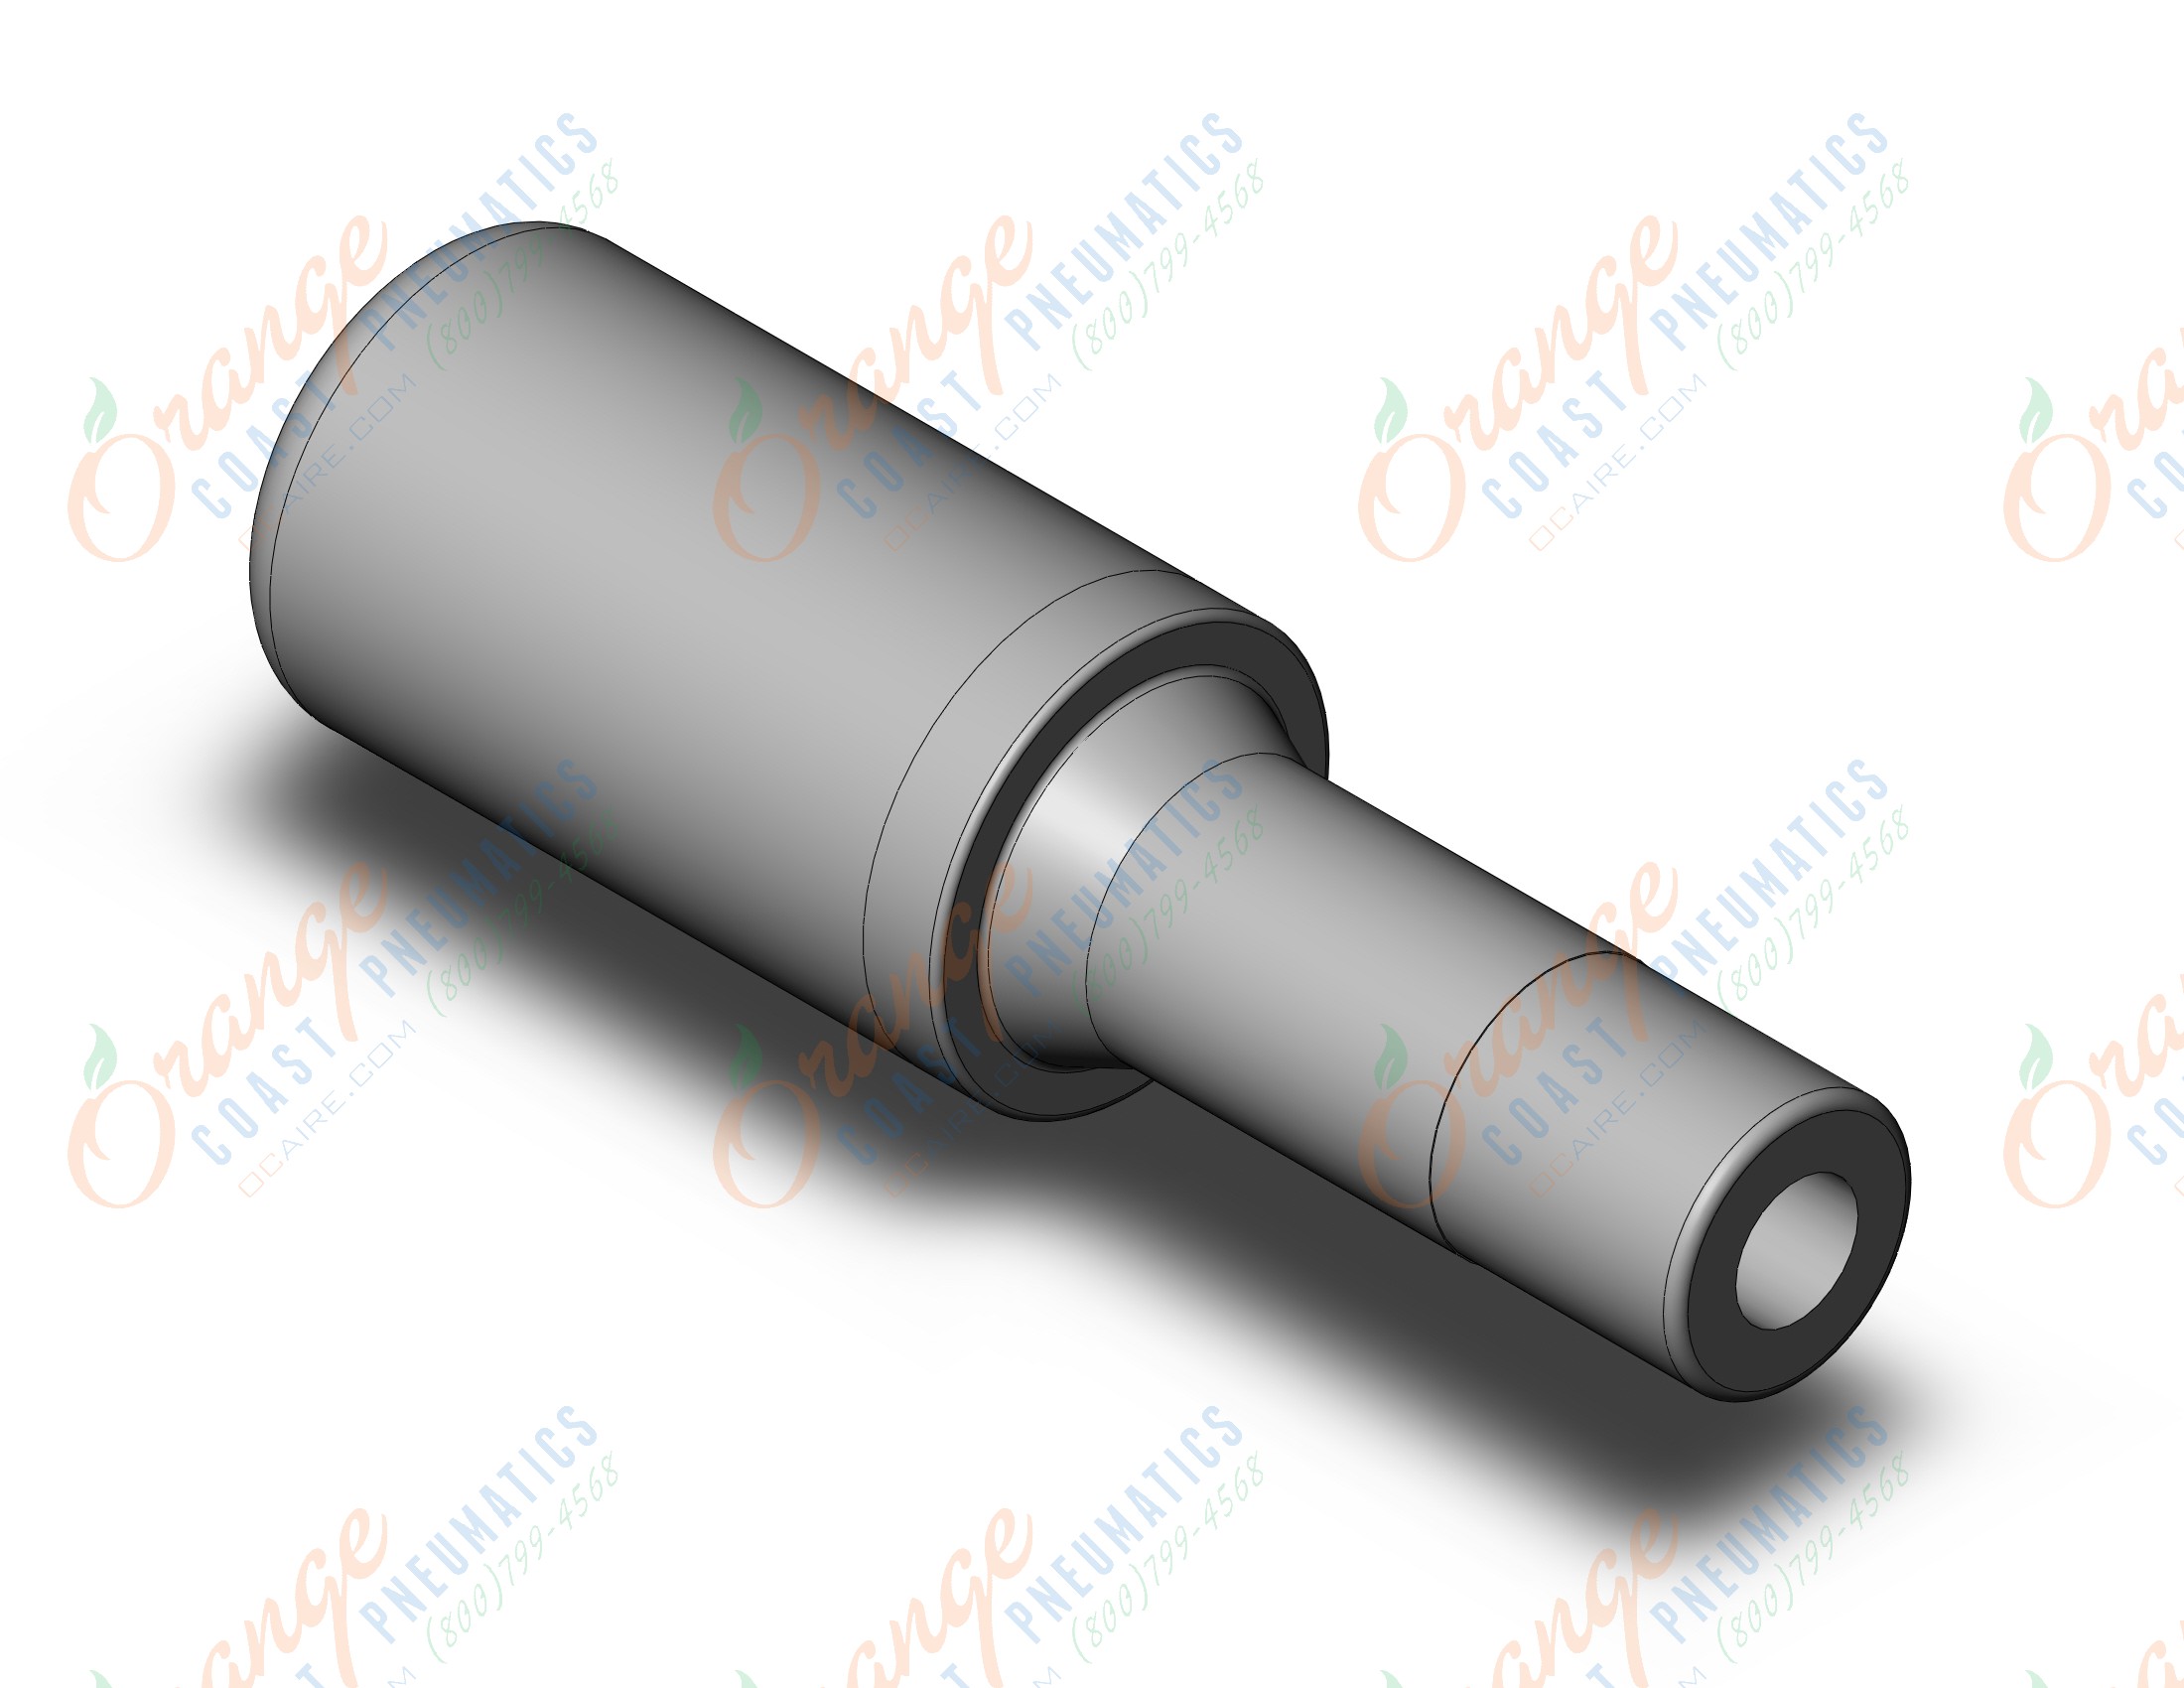 SMC AN20-C10 silencer, AN SILENCER (must be purchased in multiples of 10)